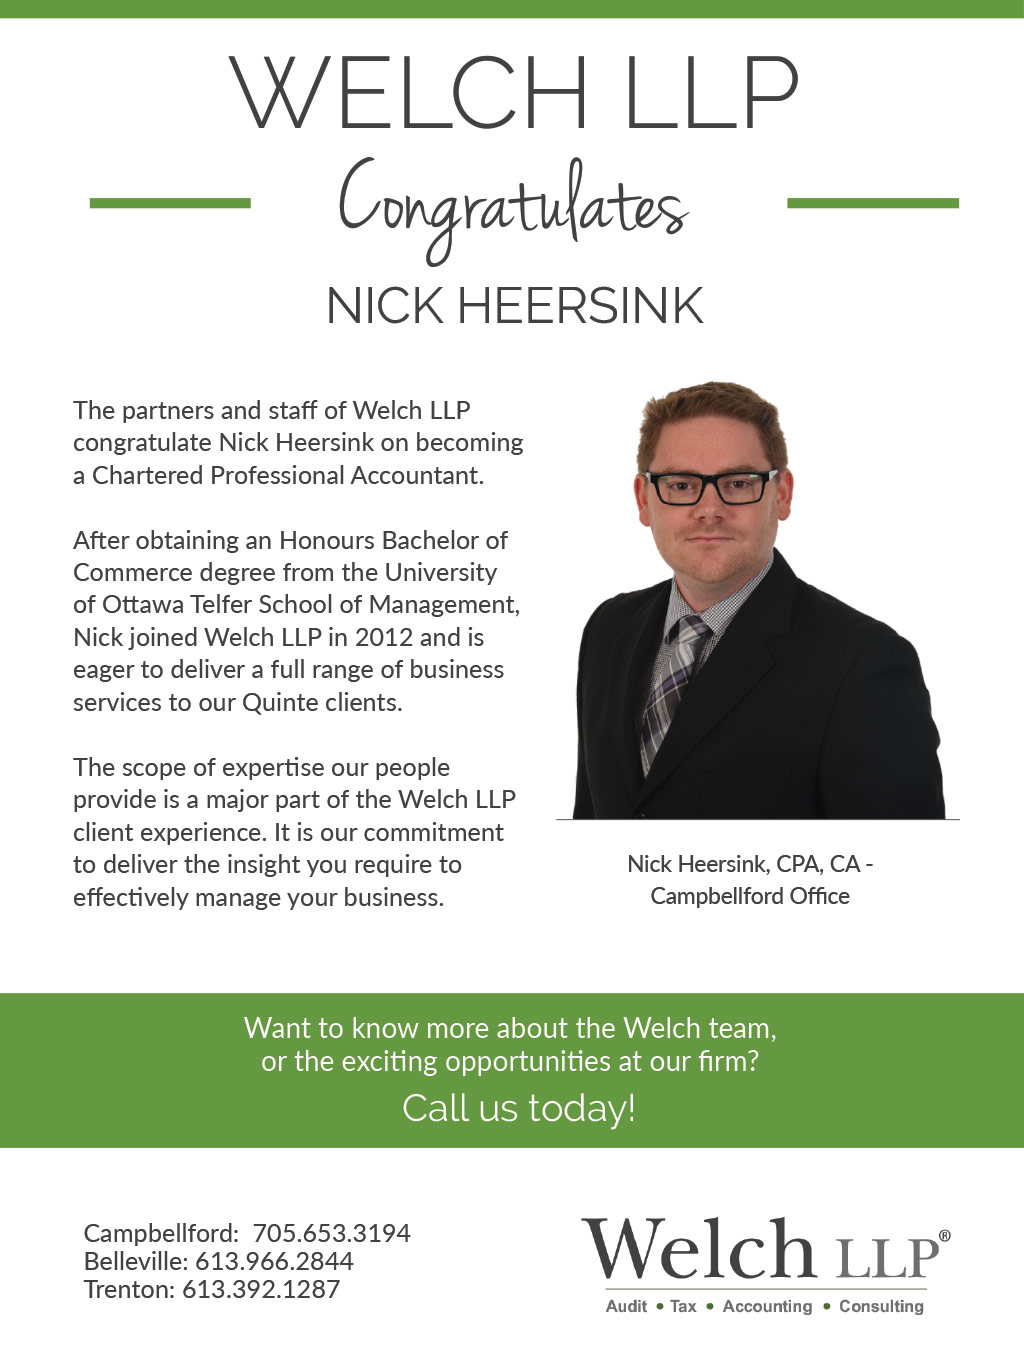  Congratulations to our newest CPA, Nick Heersink